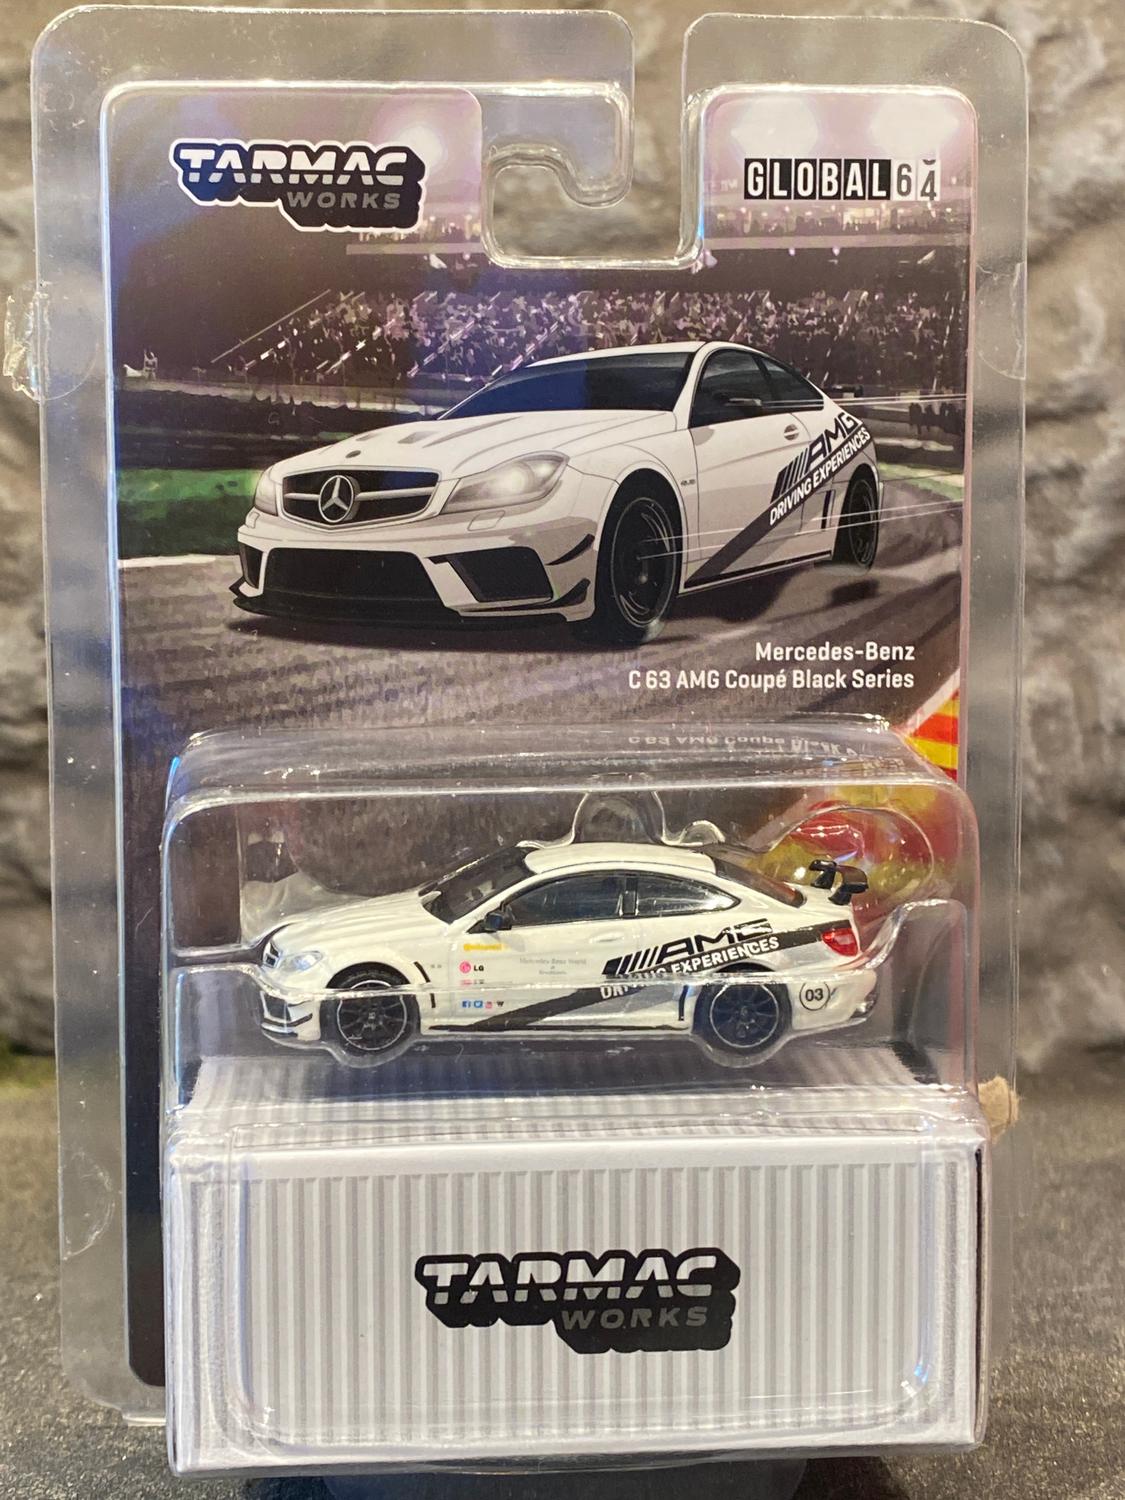 Skala 1/64 Mercedes-Benz C63 AMG Coupé Black Series m Container f TARMAC Works